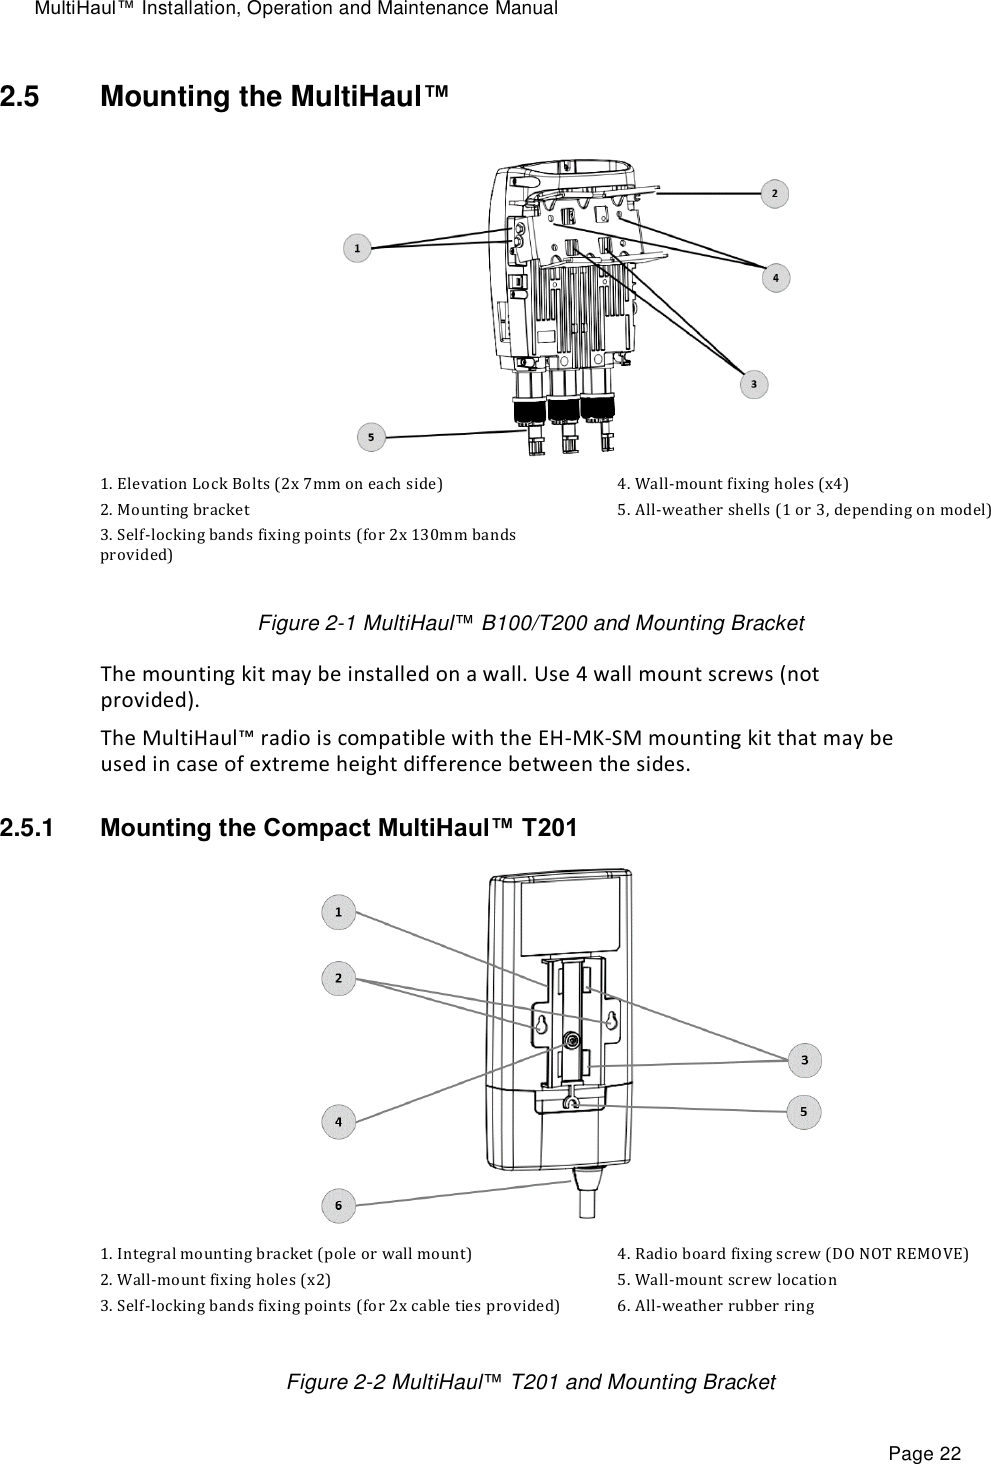 MultiHaul™ Installation, Operation and Maintenance Manual Page 22 2.5  Mounting the MultiHaul™  1. Elevation Lock Bolts (2x 7mm on each side) 2. Mounting bracket  3. Self-locking bands fixing points (for 2x 130mm bands provided) 4. Wall-mount fixing holes (x4) 5. All-weather shells (1 or 3, depending on model)  Figure 2-1 MultiHaul™ B100/T200 and Mounting Bracket The mounting kit may be installed on a wall. Use 4 wall mount screws (not provided). The MultiHaul™ radio is compatible with the EH-MK-SM mounting kit that may be used in case of extreme height difference between the sides. 2.5.1  Mounting the Compact MultiHaul™ T201  1. Integral mounting bracket (pole or wall mount) 2. Wall-mount fixing holes (x2) 3. Self-locking bands fixing points (for 2x cable ties provided) 4. Radio board fixing screw (DO NOT REMOVE) 5. Wall-mount screw location 6. All-weather rubber ring  Figure 2-2 MultiHaul™ T201 and Mounting Bracket 